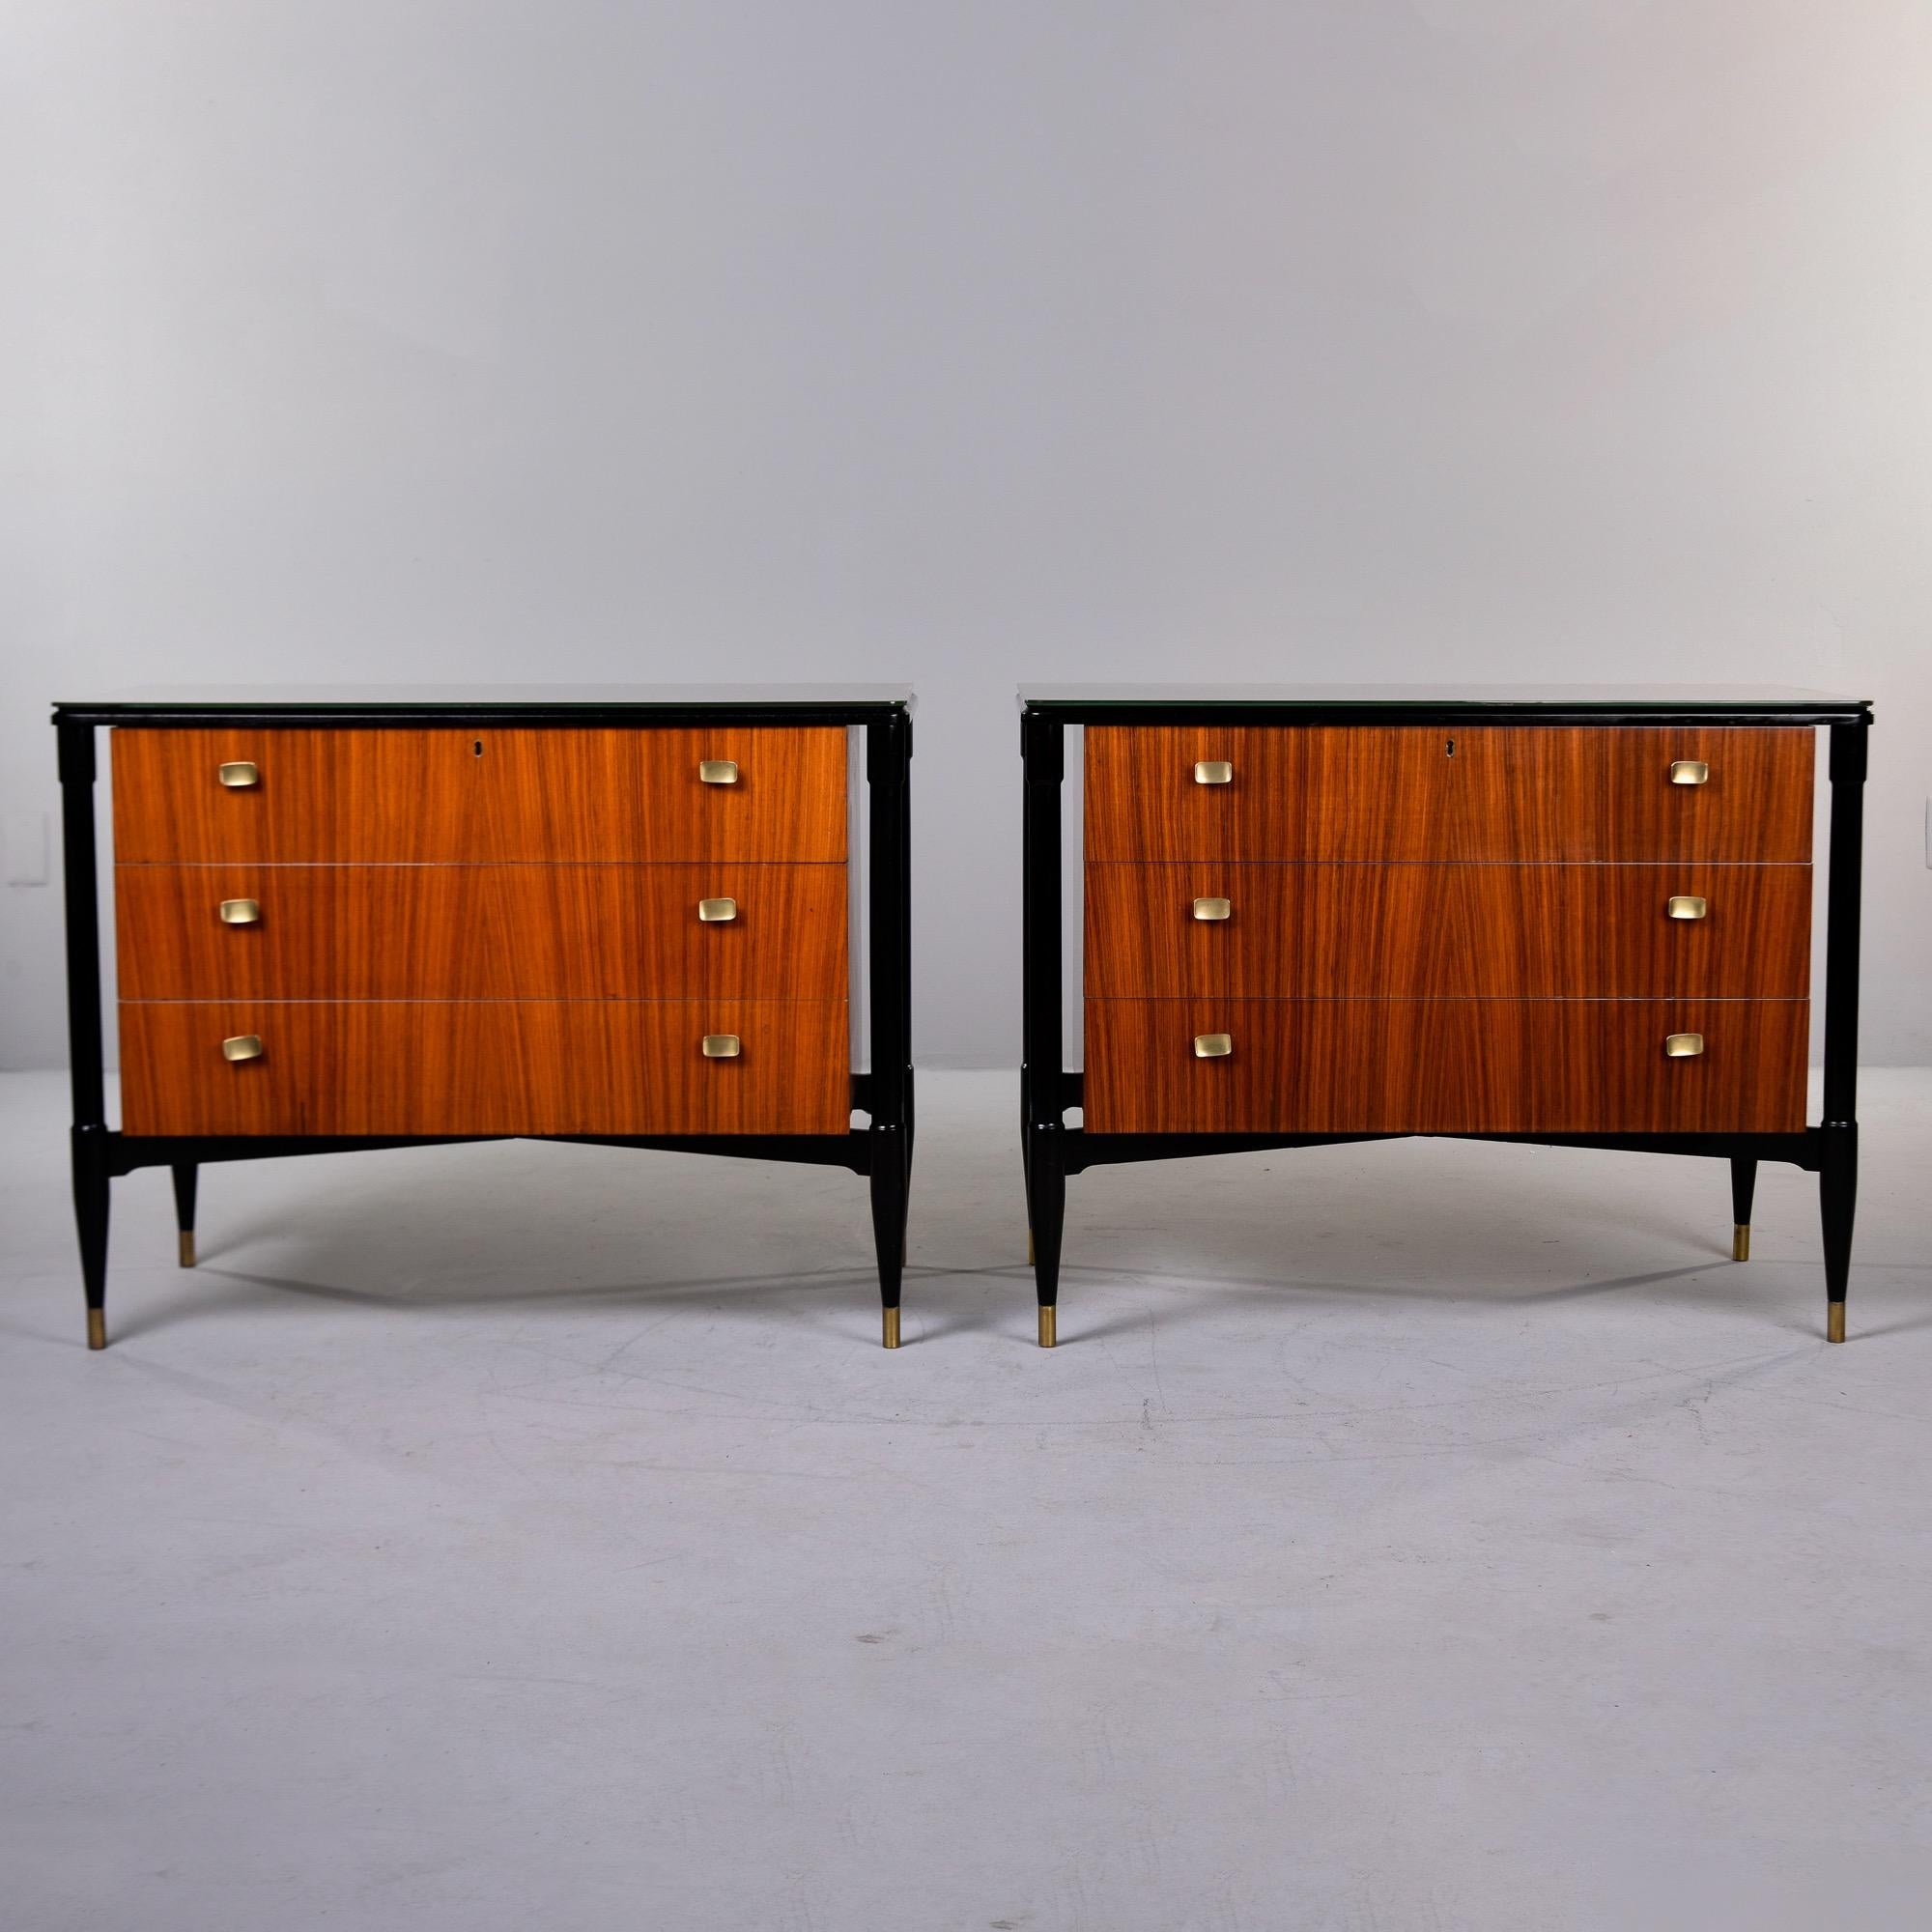 Found in Italy, this pair of mahogany three drawer sides chests date from the late 1950s / early 1960s. Chests are set on floating style black frames with X-form stretchers and brass capped feet. Tops are covered in opaque, off-white glass with